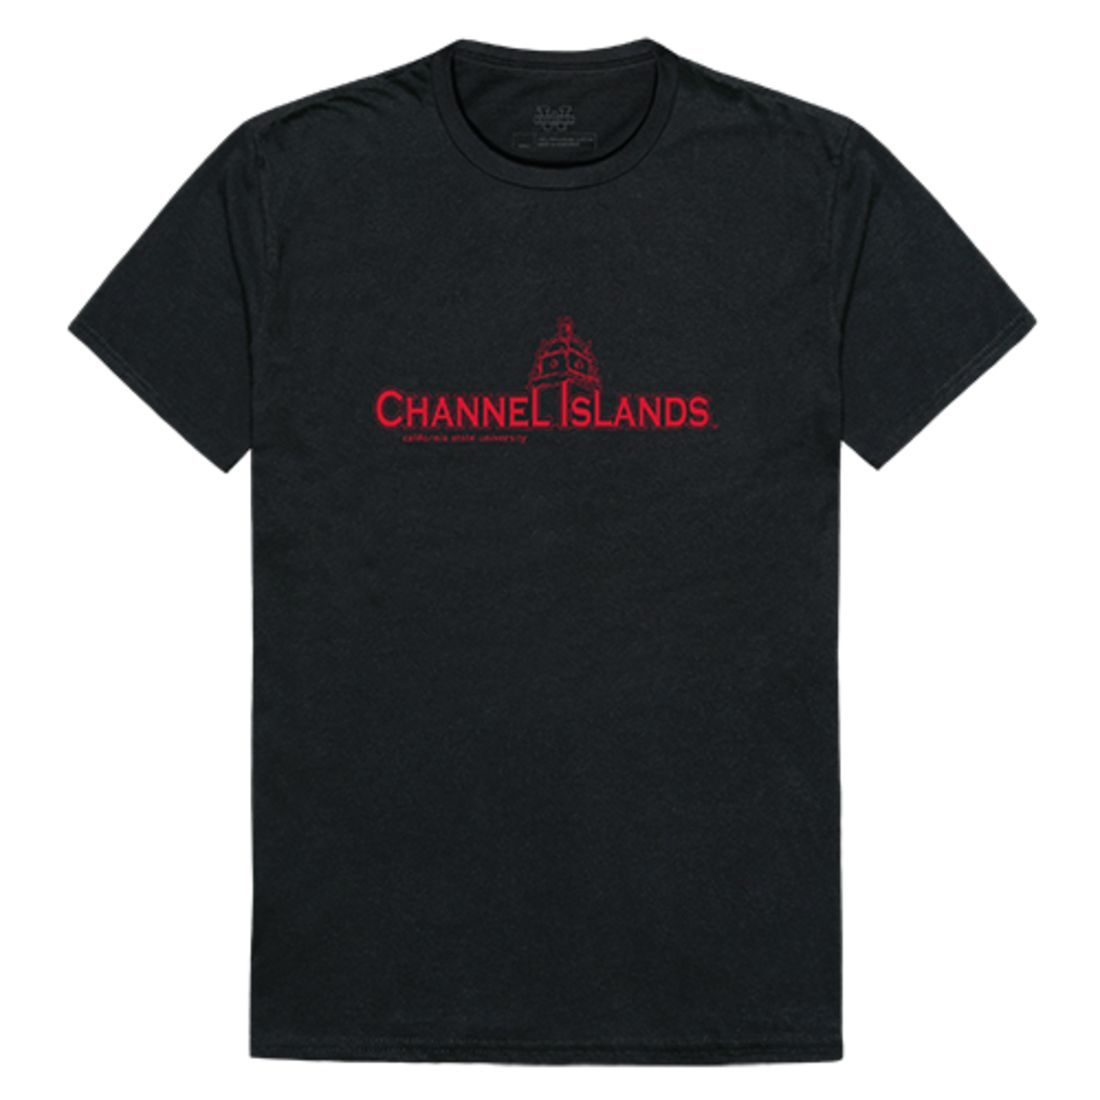 CSUCI CalIfornia State University Channel Islands The Dolphins Institutional T-Shirt Black-Campus-Wardrobe